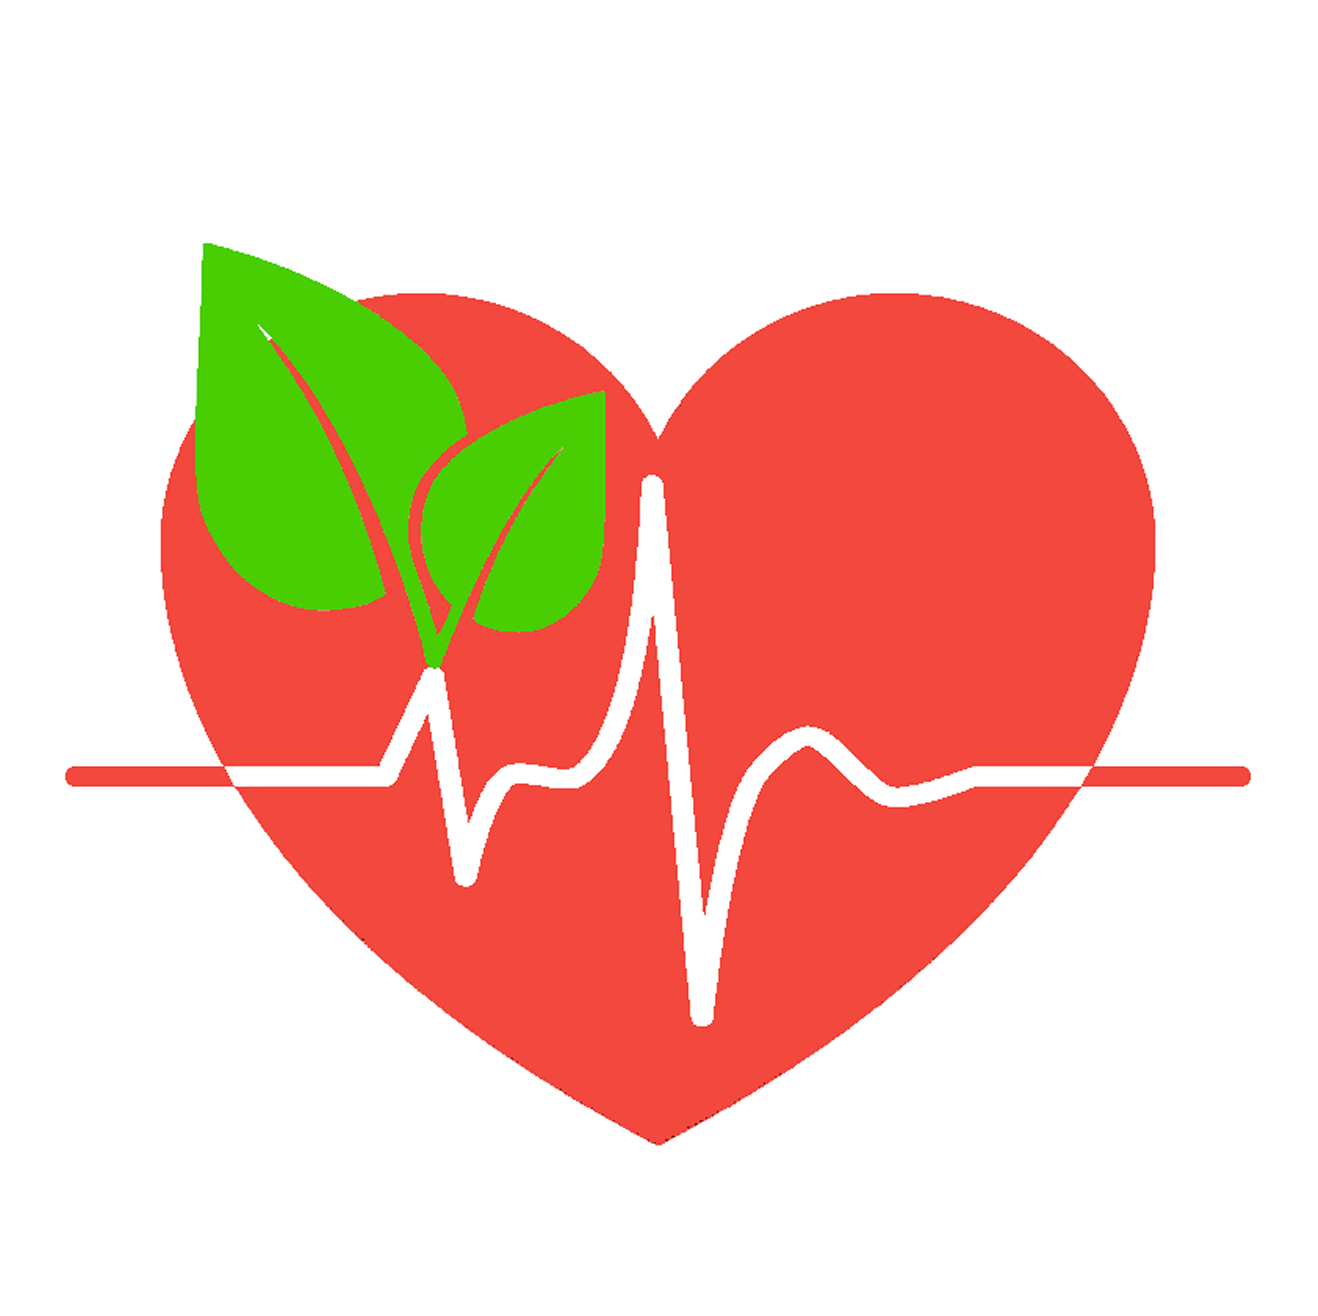 Disease clipart unhealthy heart. Home www yourchoices life